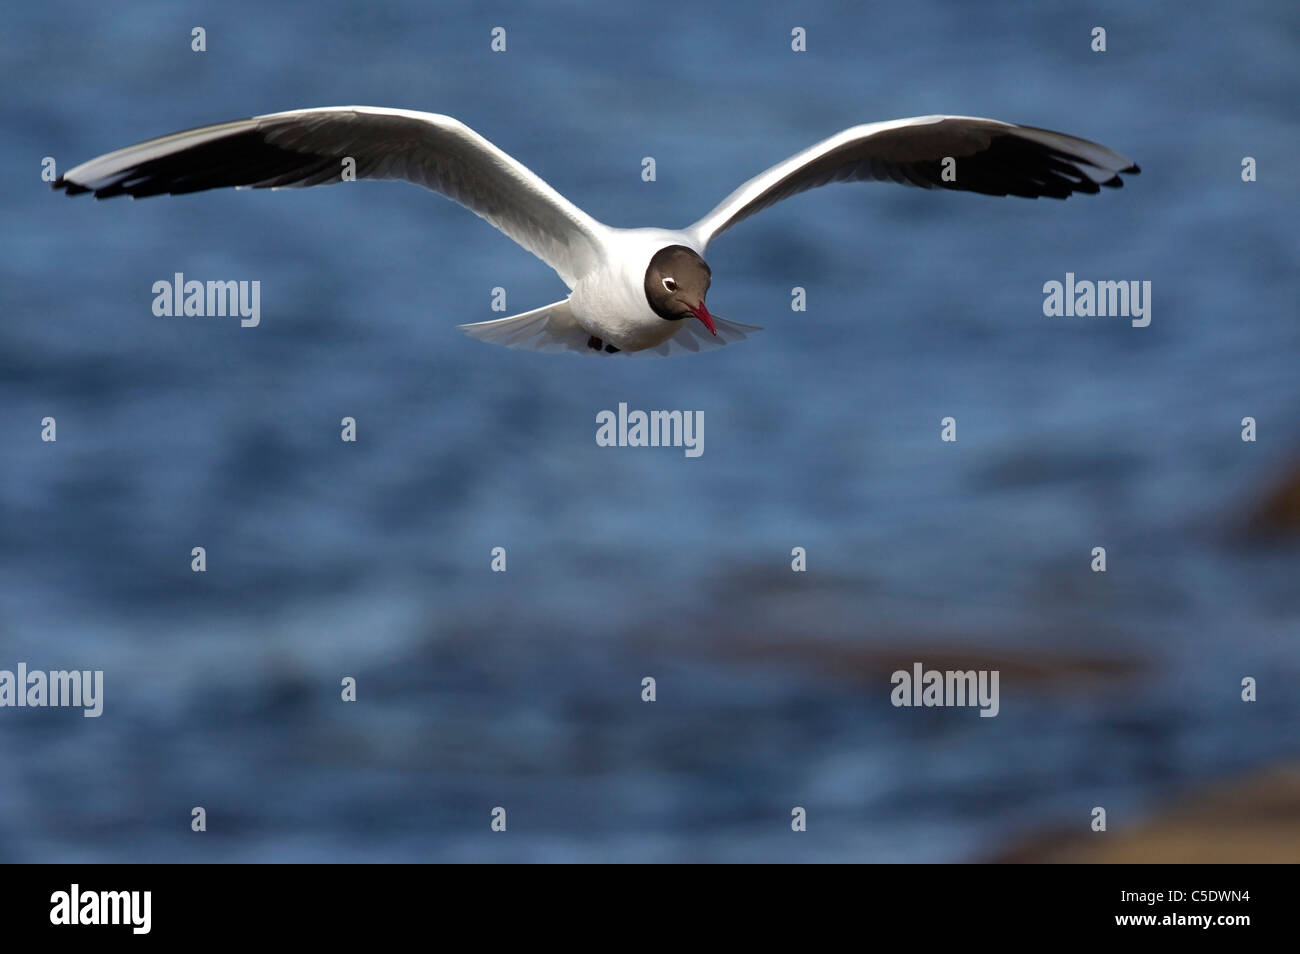 Close-up of a gull with spread wings in flight against blurred water Stock Photo